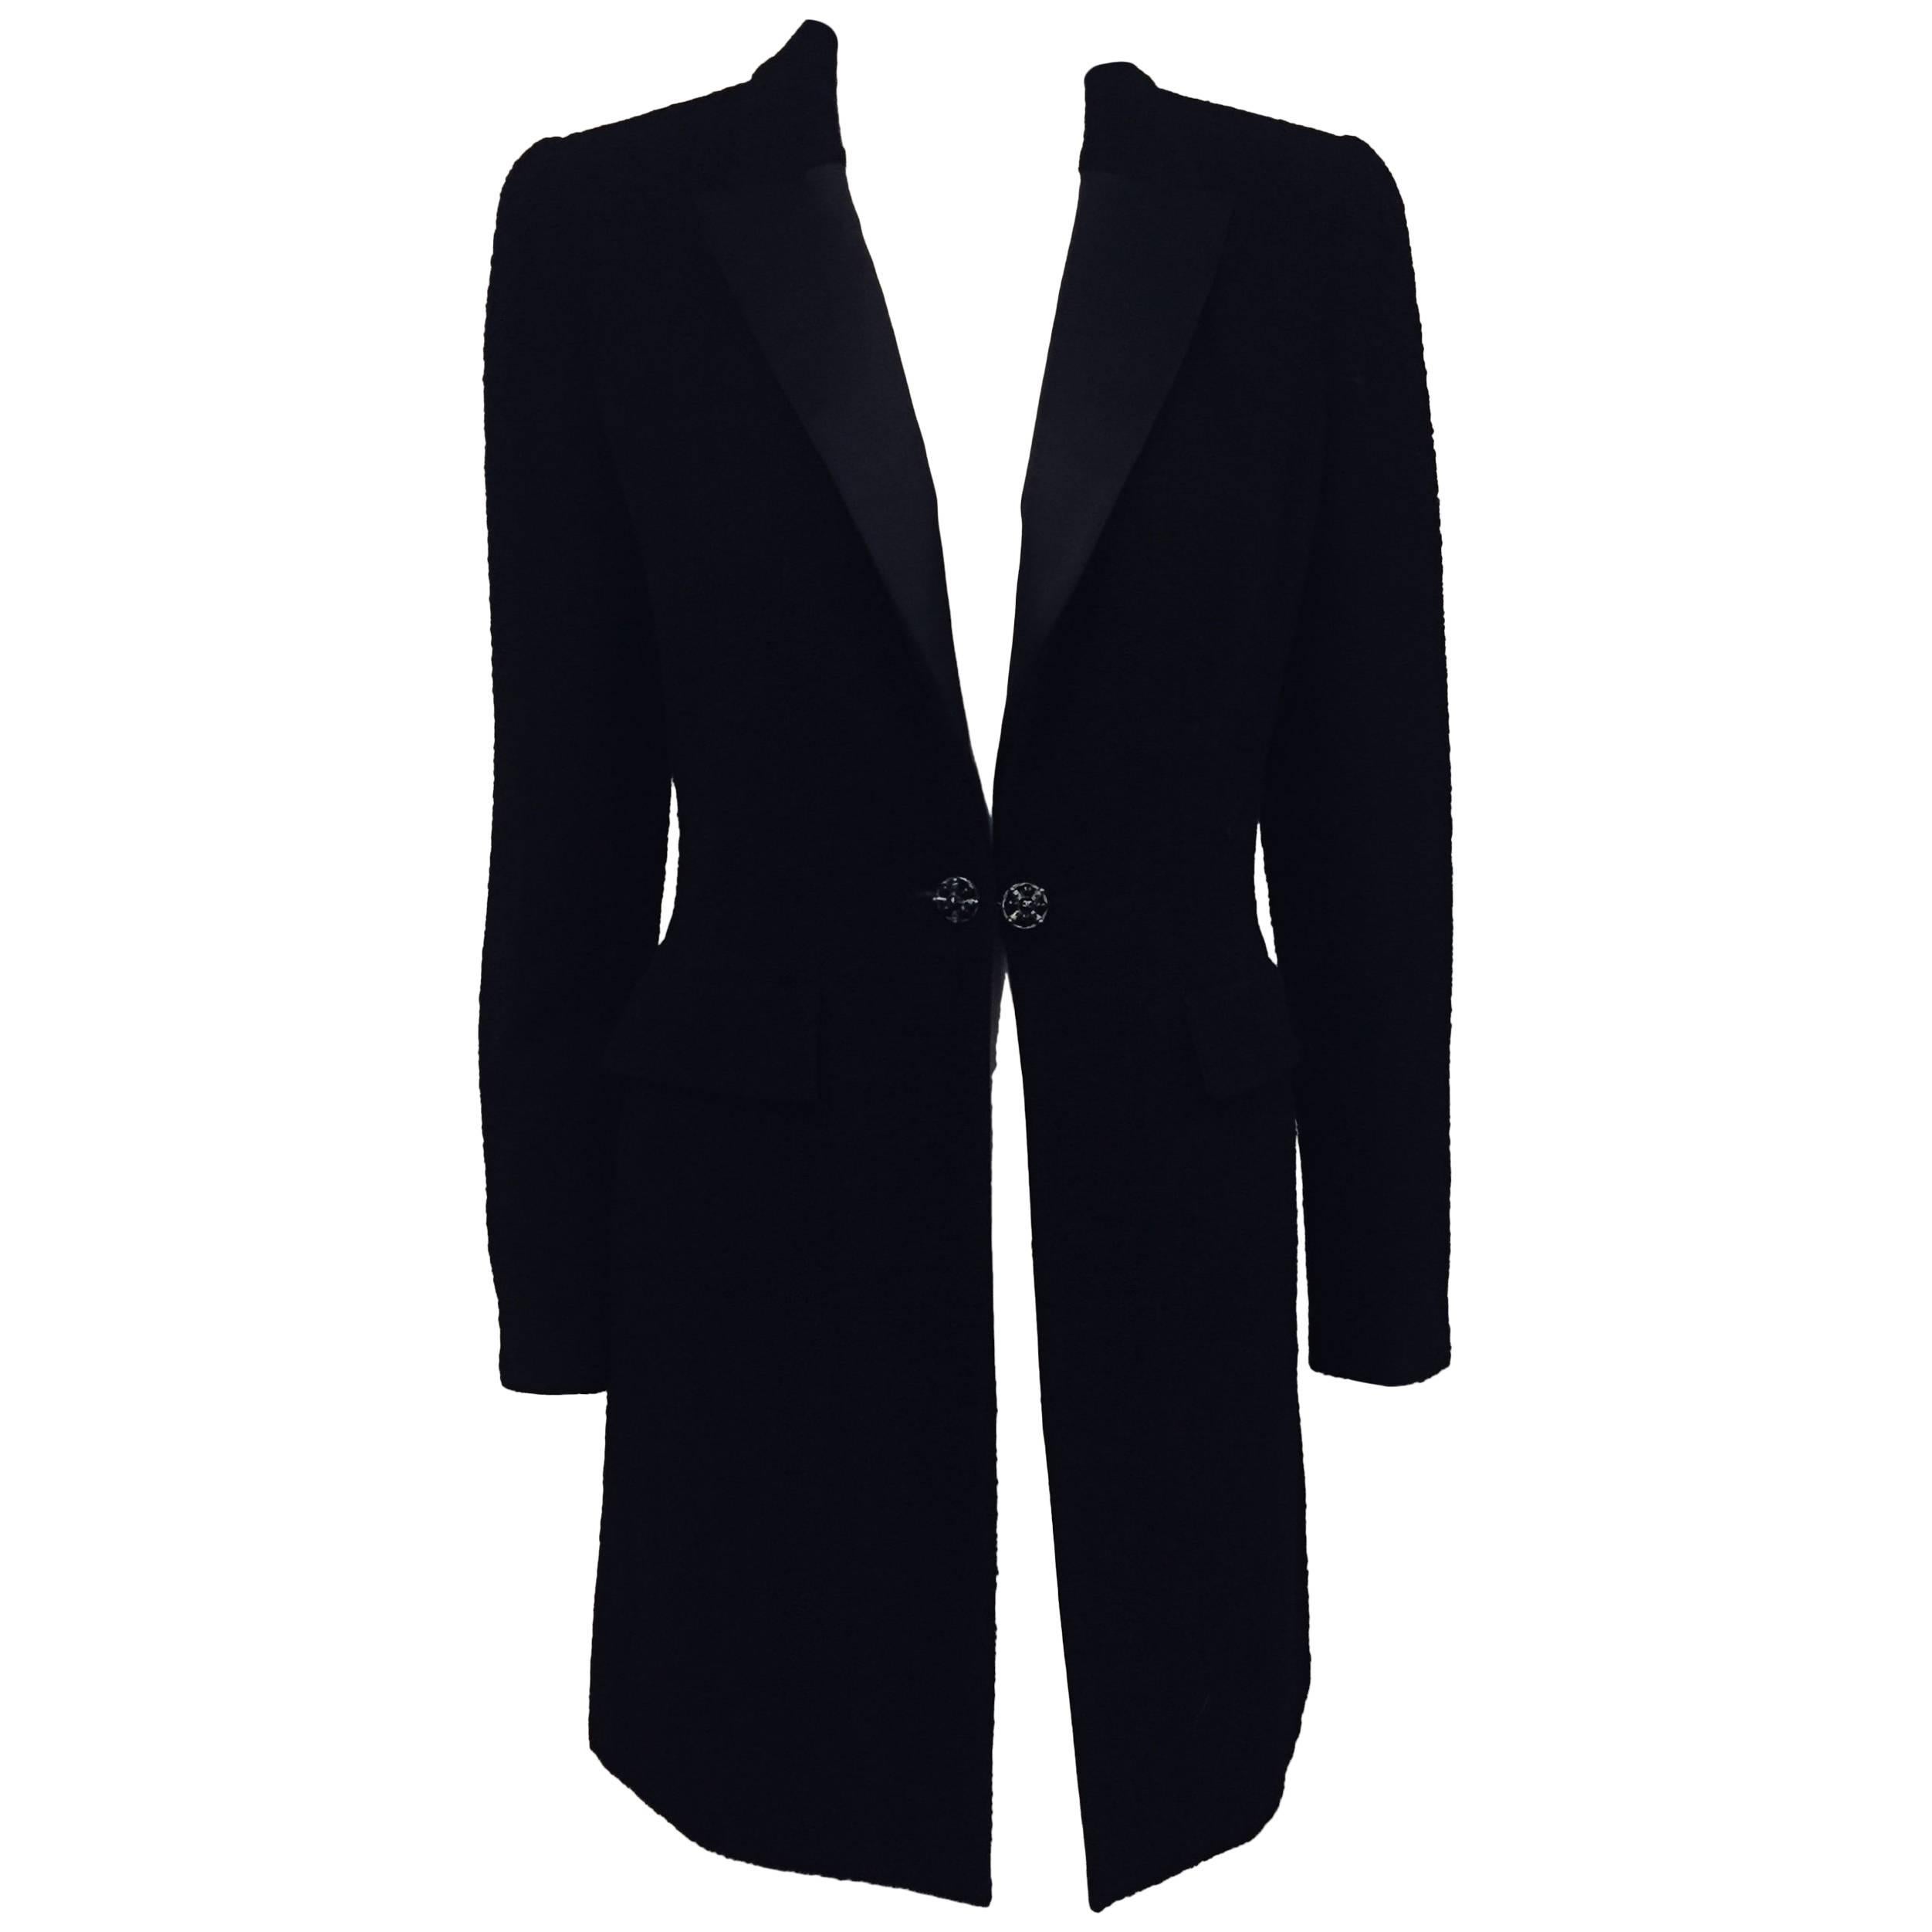 Classic Chanel Black Wool Blend Tuxedo Style Long Jacket w/ Pewter Metal Buttons